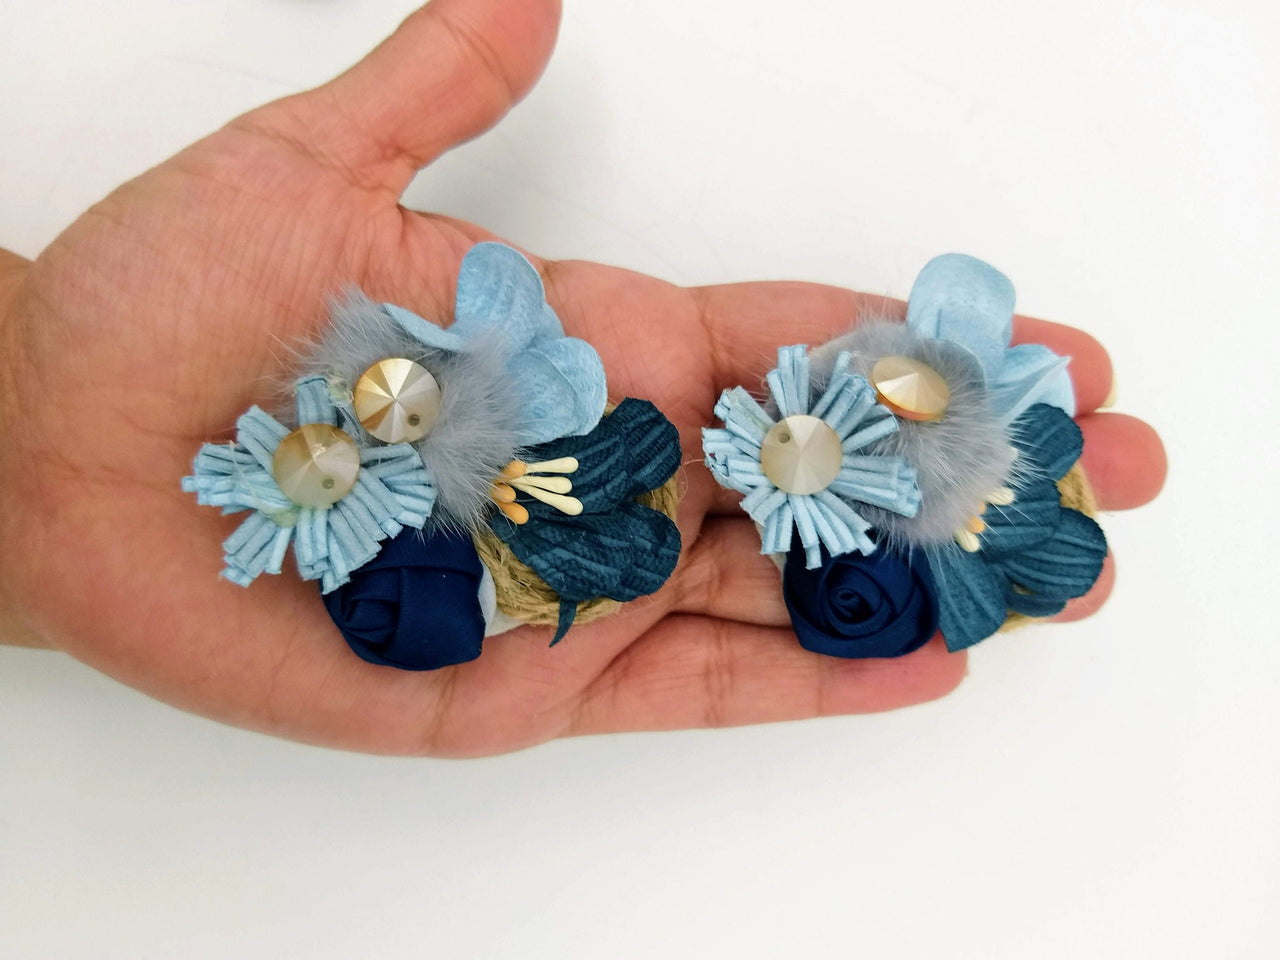 Hand Embroidered Blue Floral Applique With Feather Pom Poms and Stones, 2 Pcs